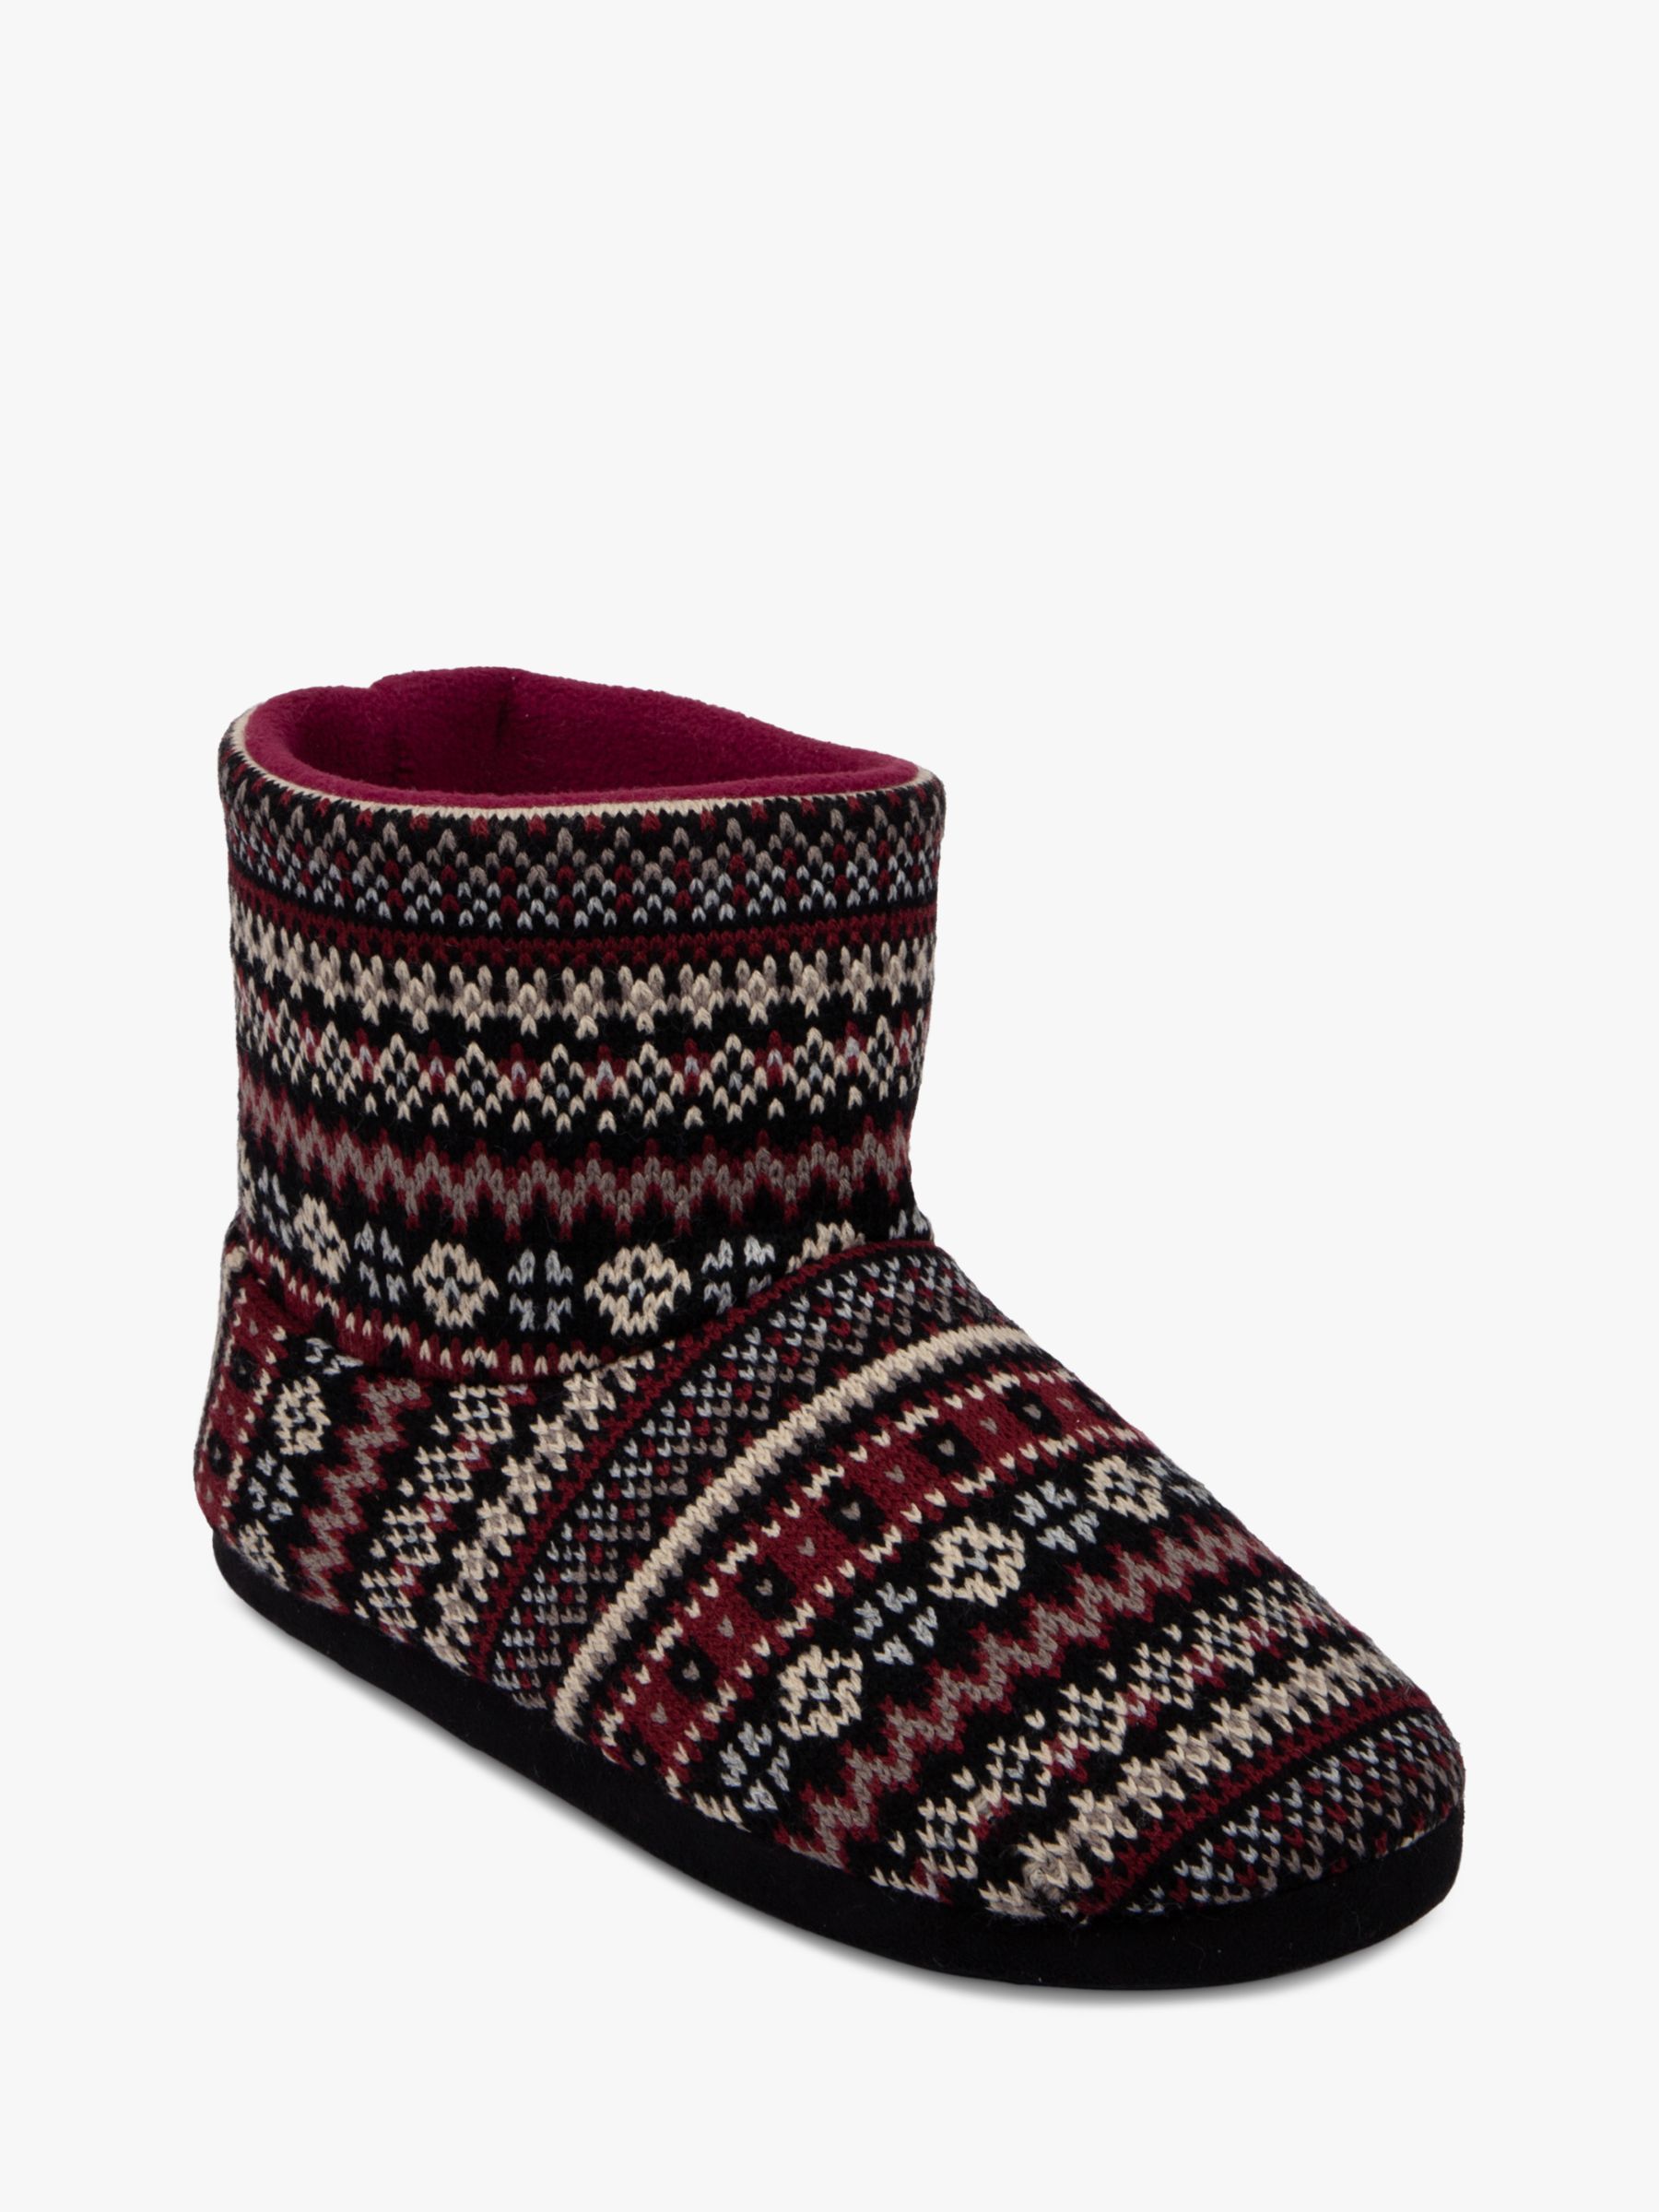 totes Fair Isle Bootie Style Slippers, Multi at John Lewis & Partners